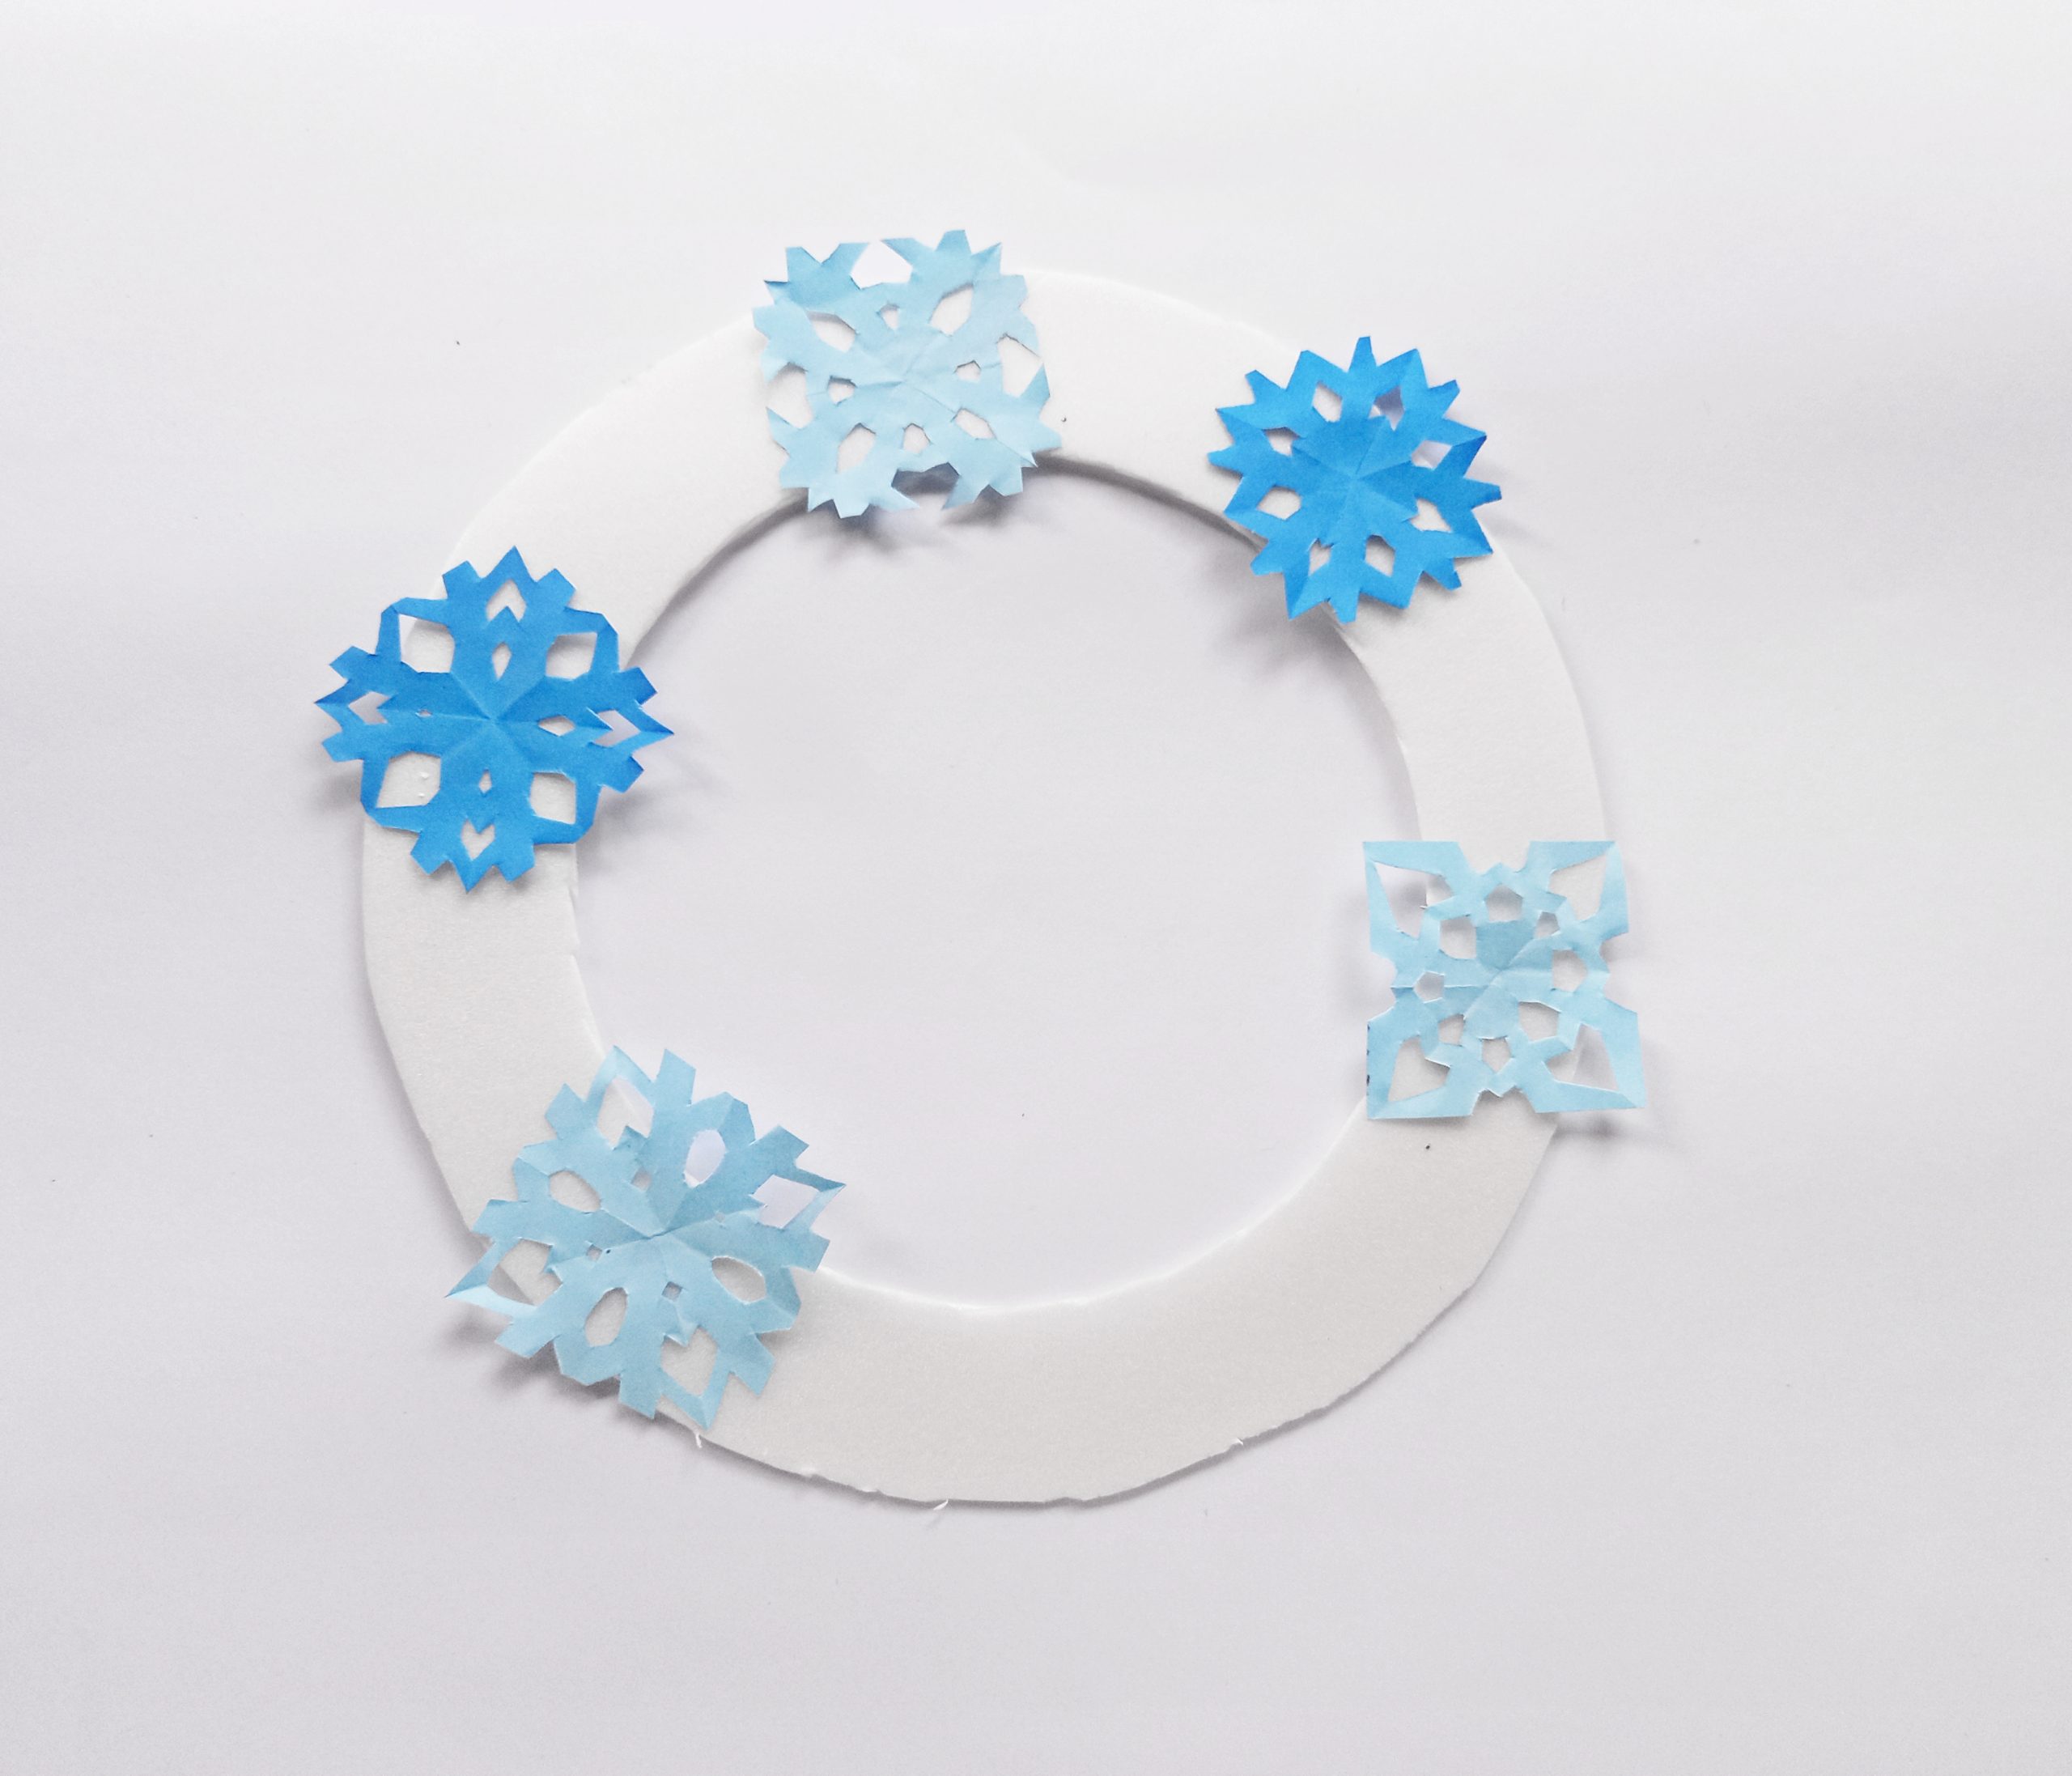 how to make a winter wreath with snowflakes and a snowman